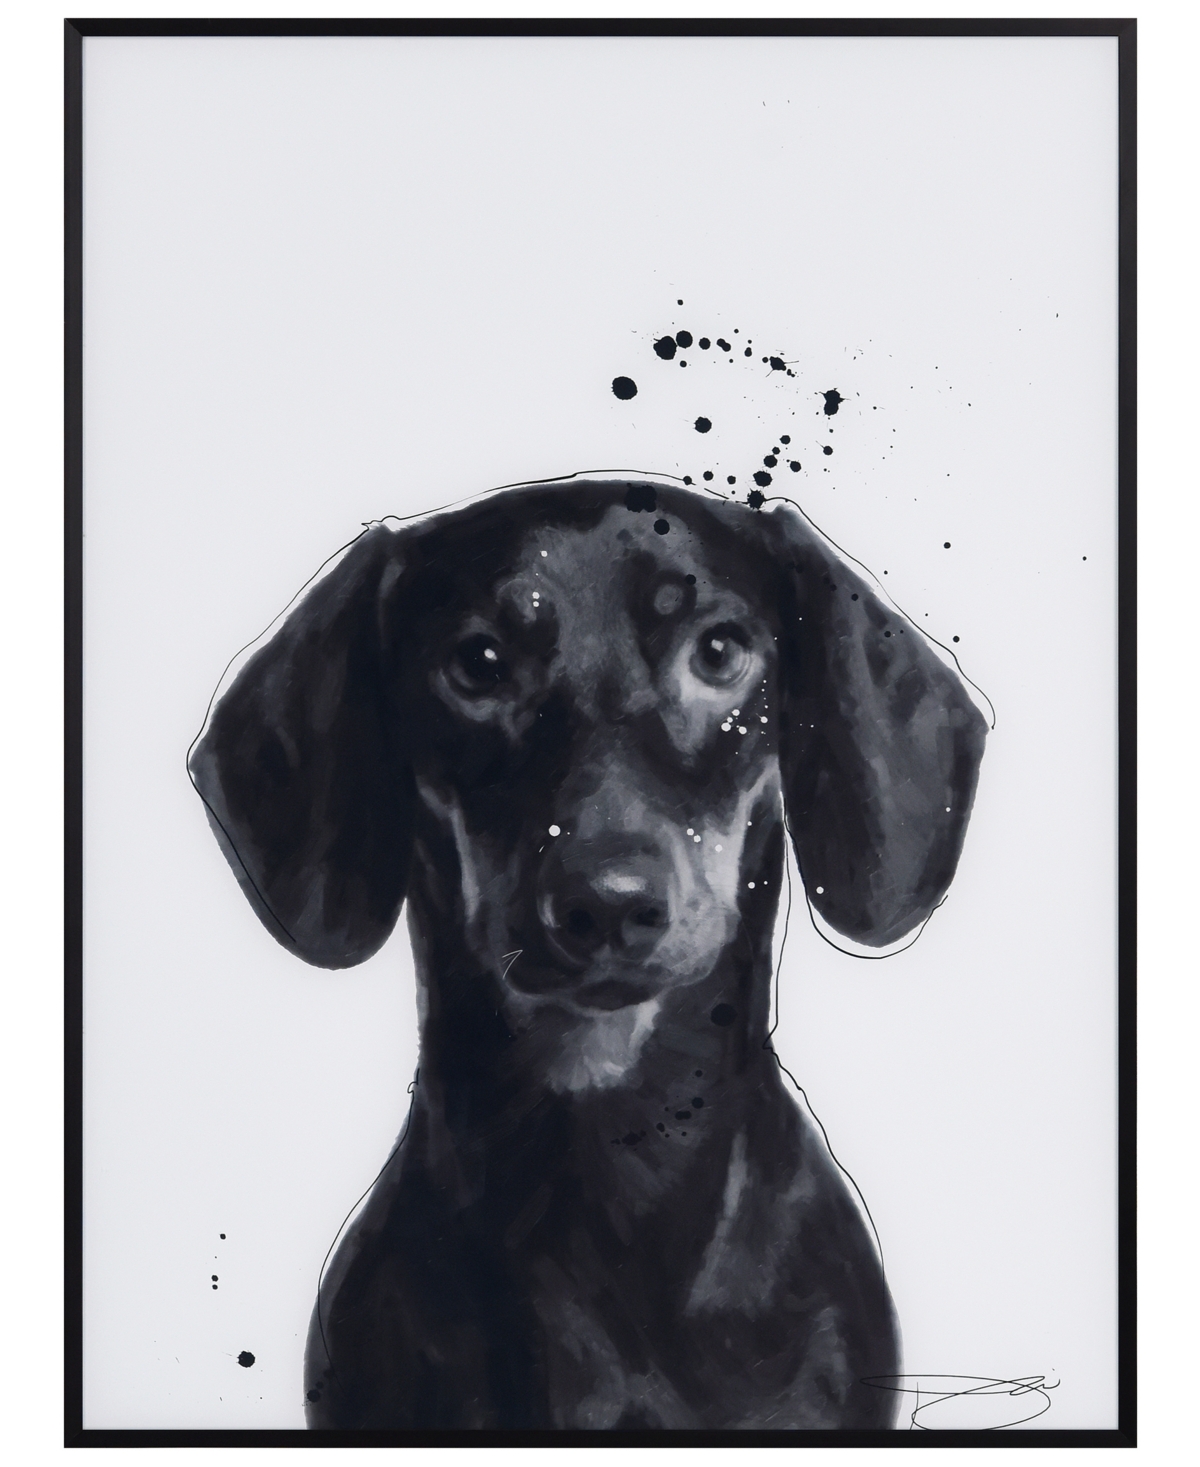 Empire Art Direct "labrador Retriever" Pet Paintings On Printed Glass Encased With A Black Anodized Frame, 24" X 18" X In Black And White